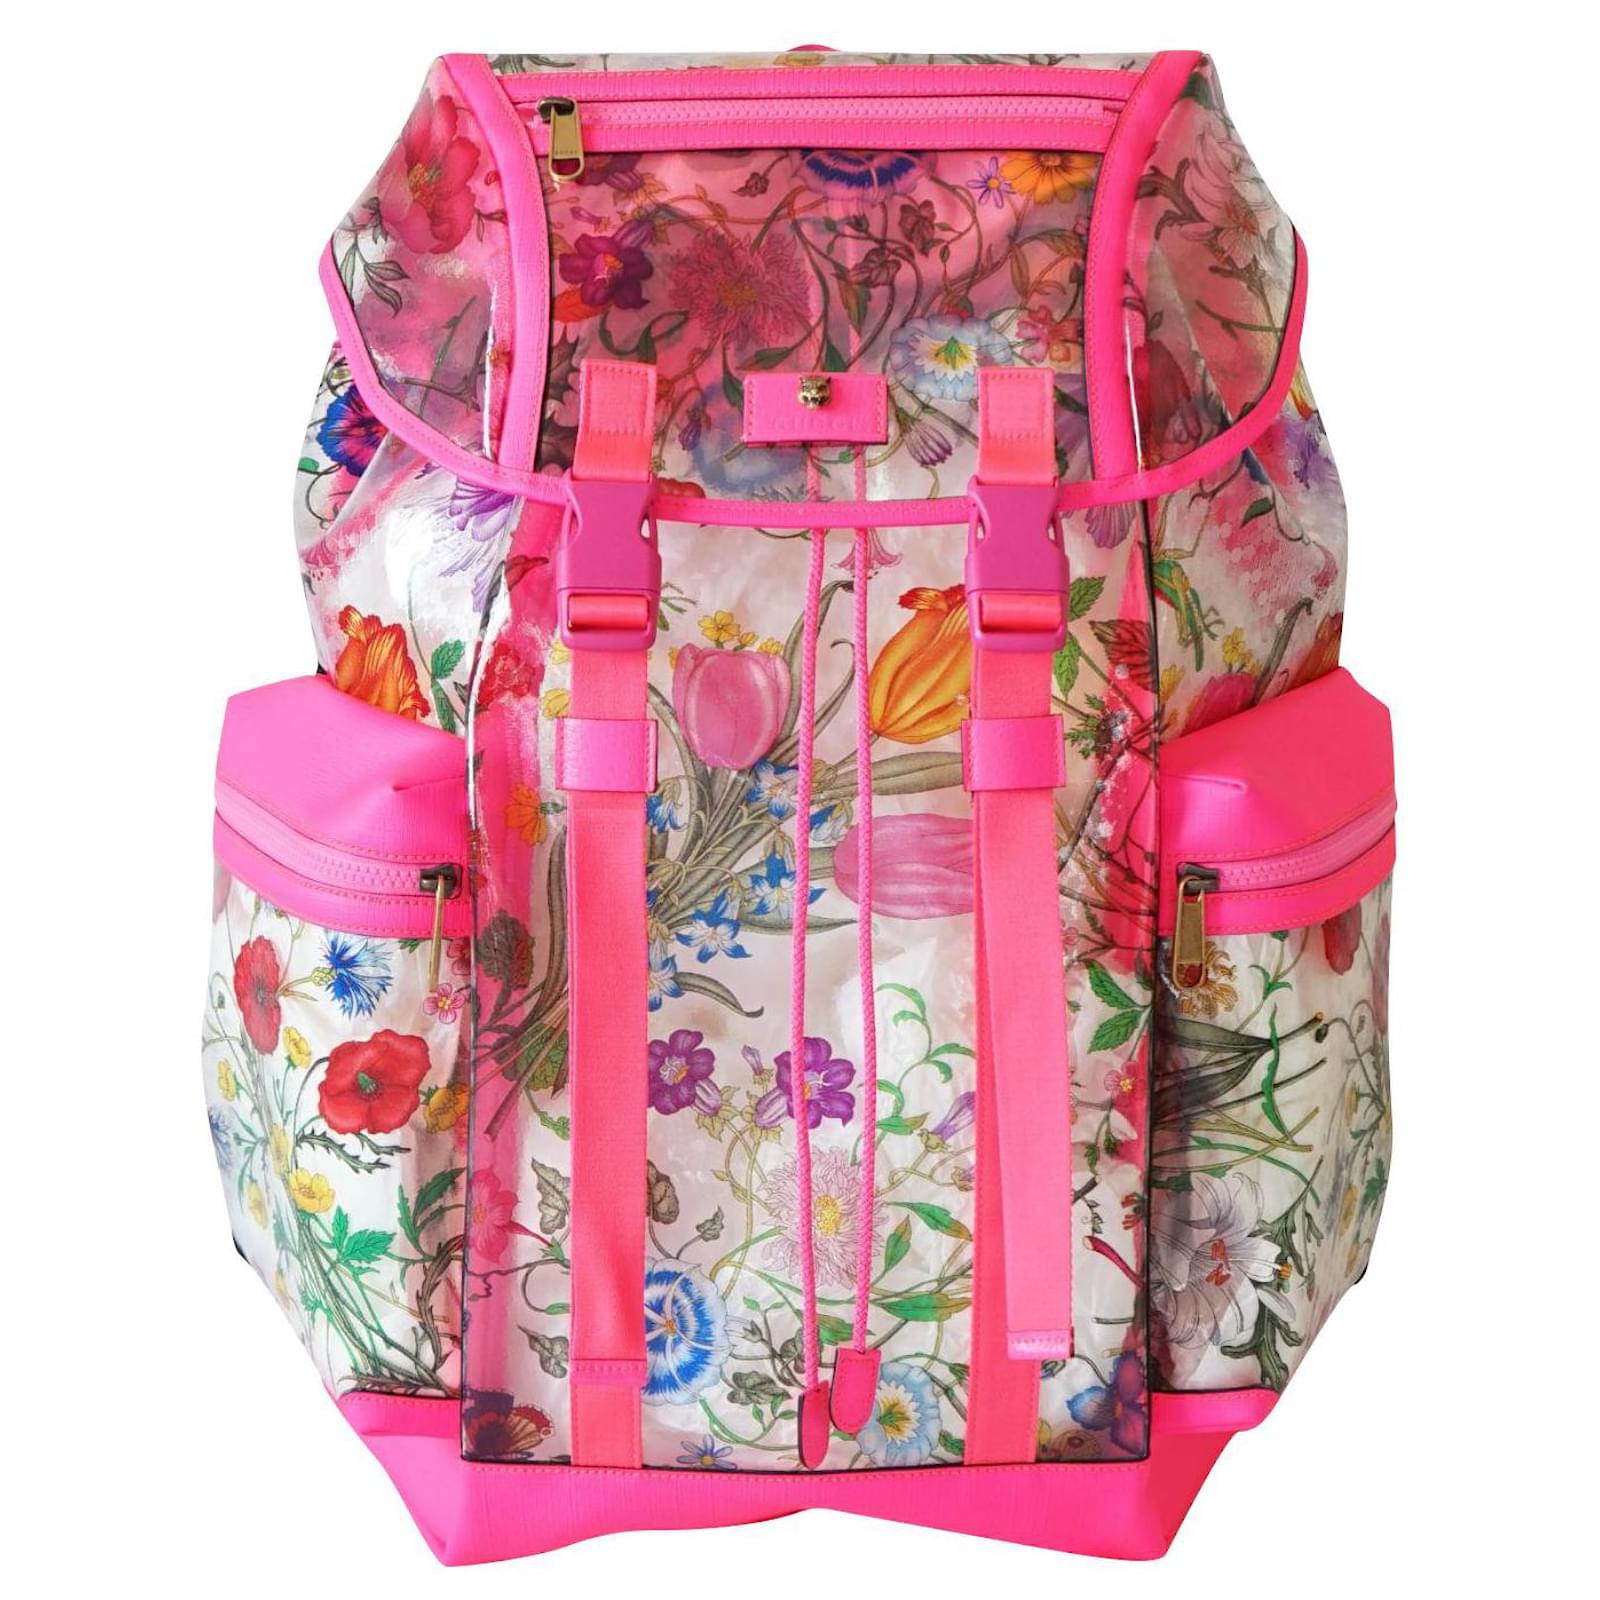 pink gucci backpack